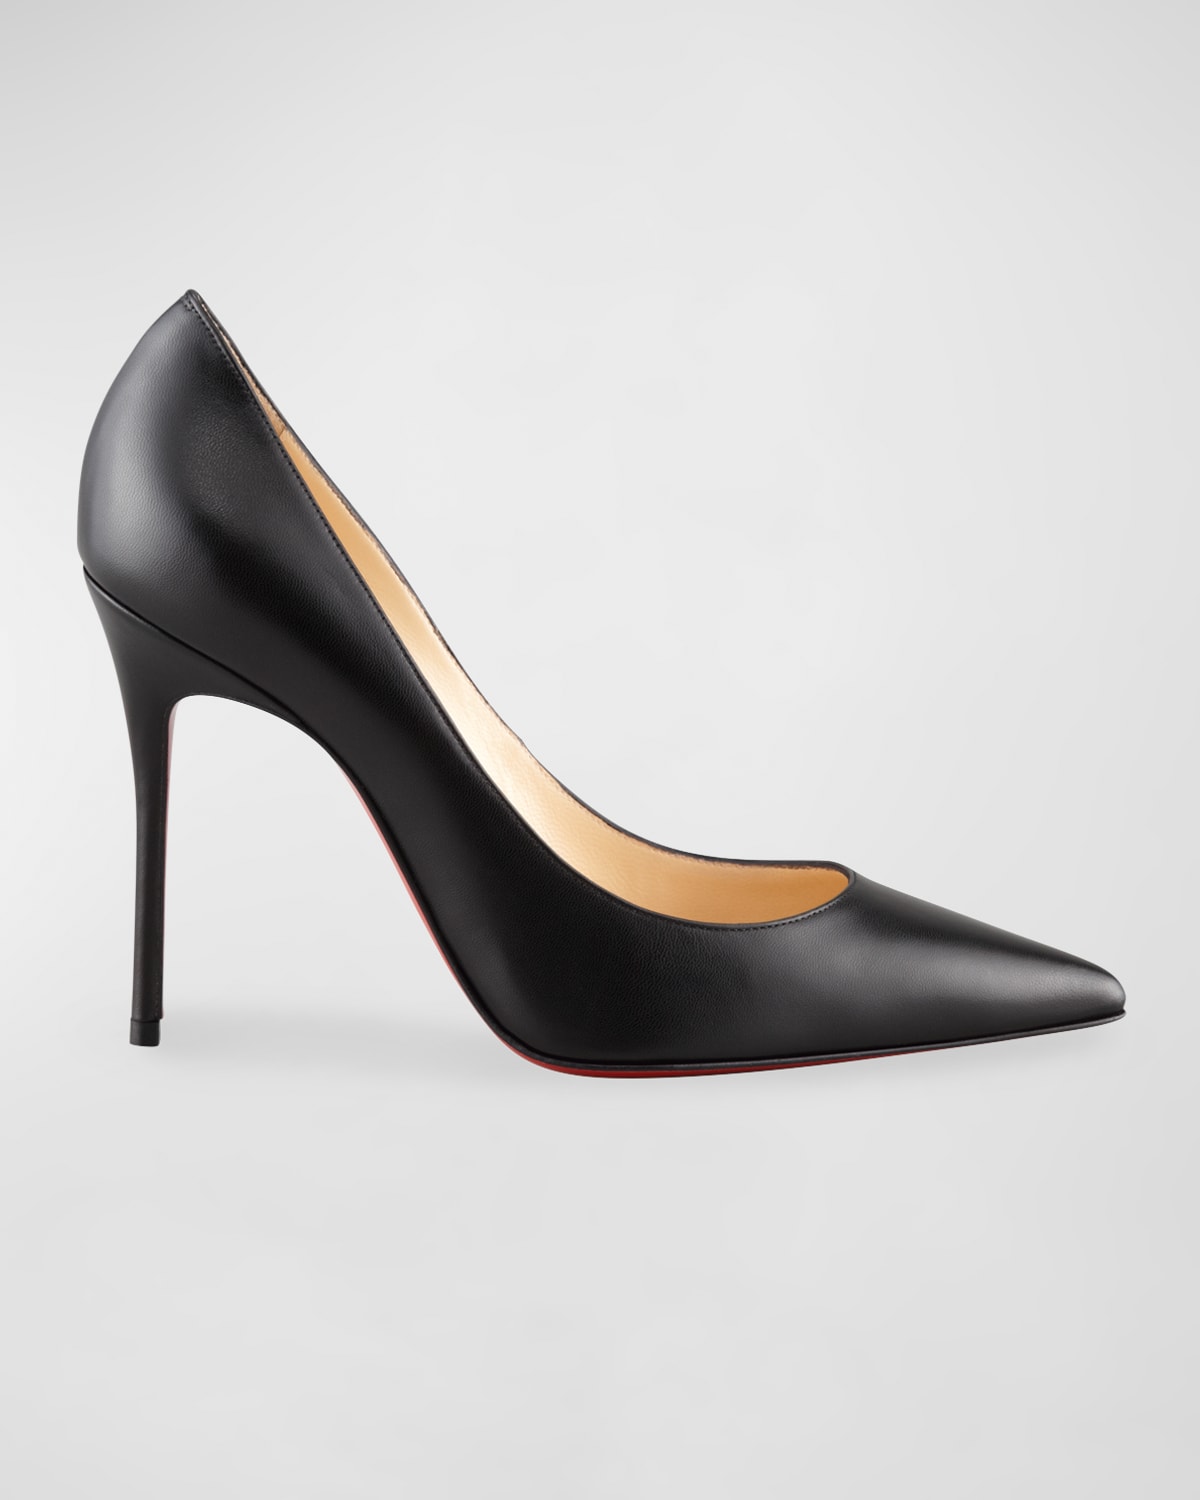 Christian Louboutin Kate Red Sole High-Heel Pumps, Black